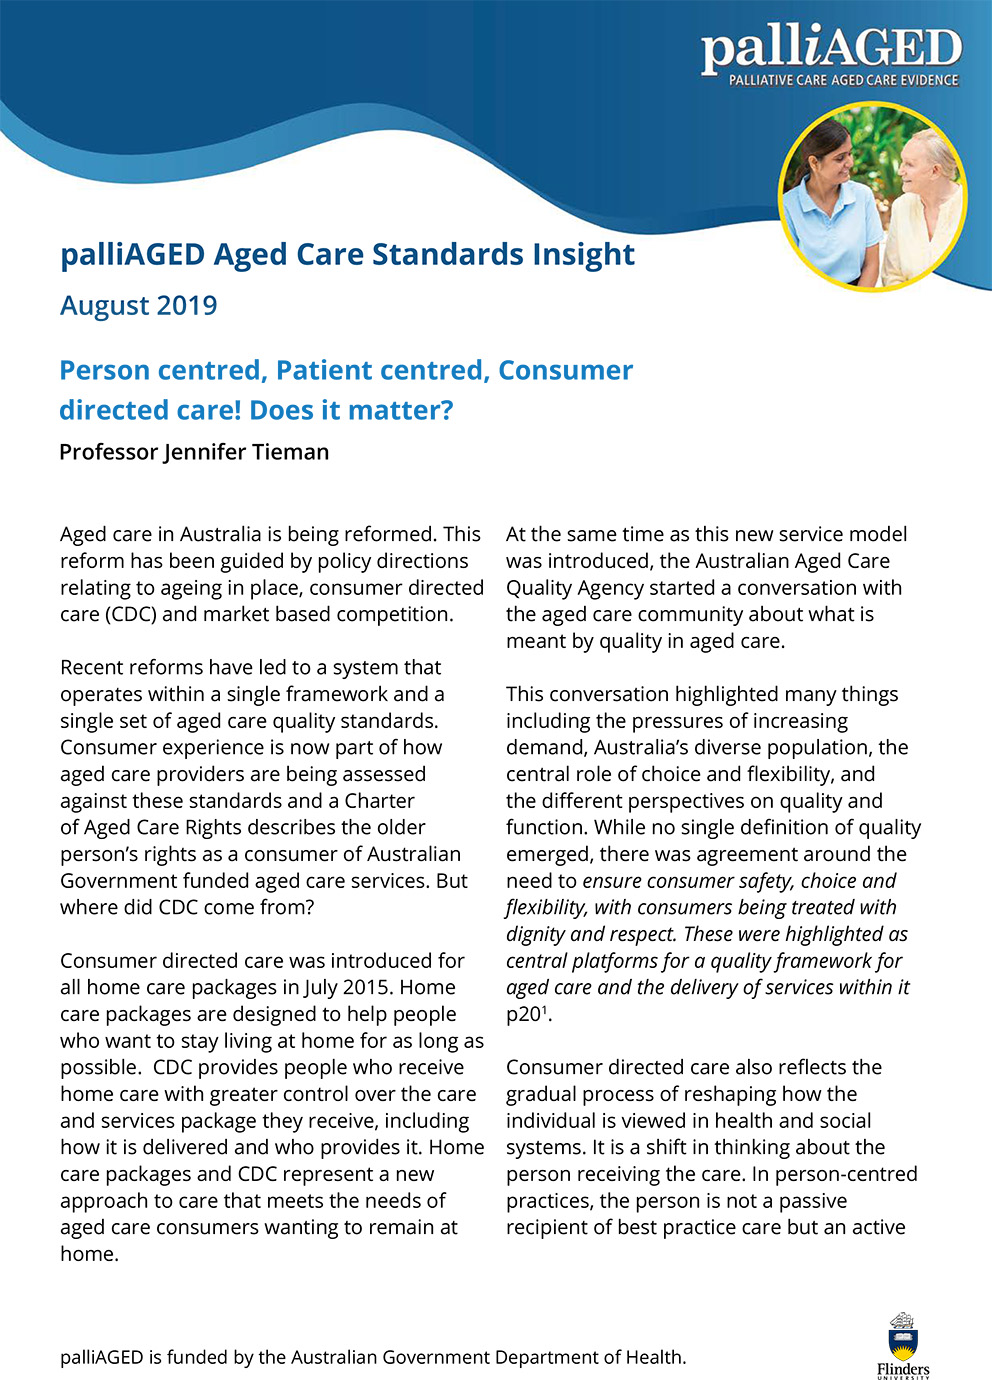 palliAGED Aged Care Standards insight August 2019 thumbnail